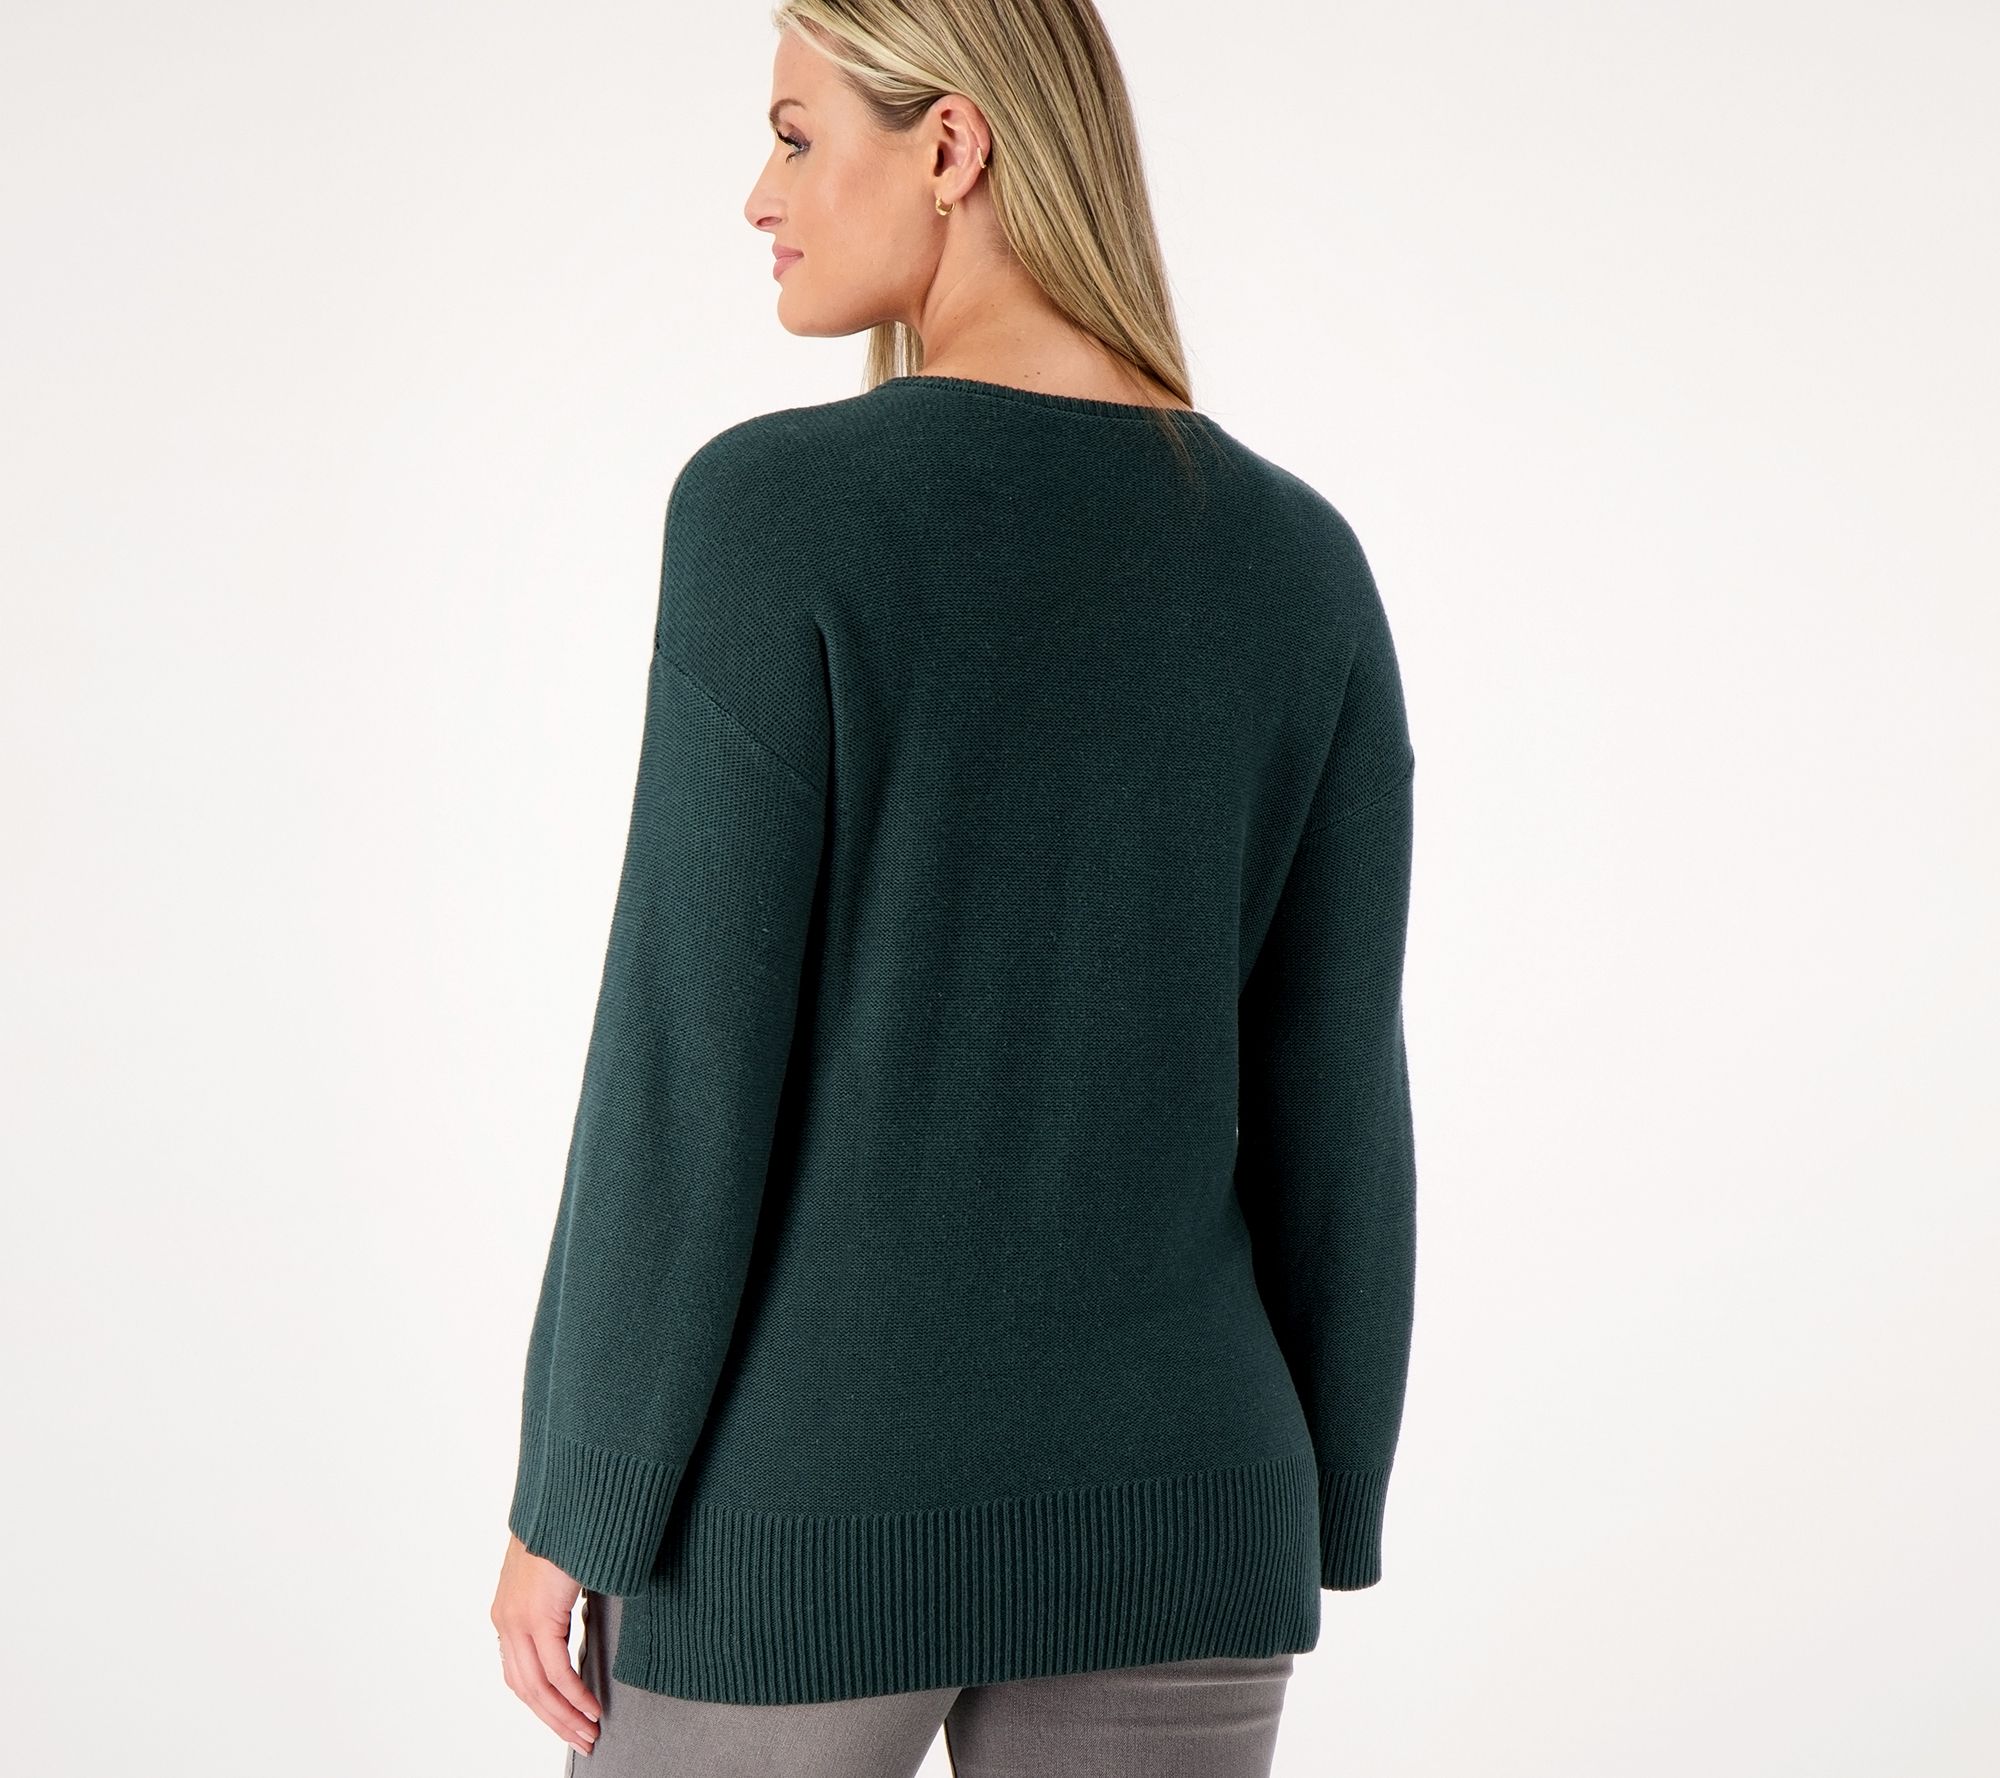 Girl With Curves Petite Sweater Tunic - QVC.com